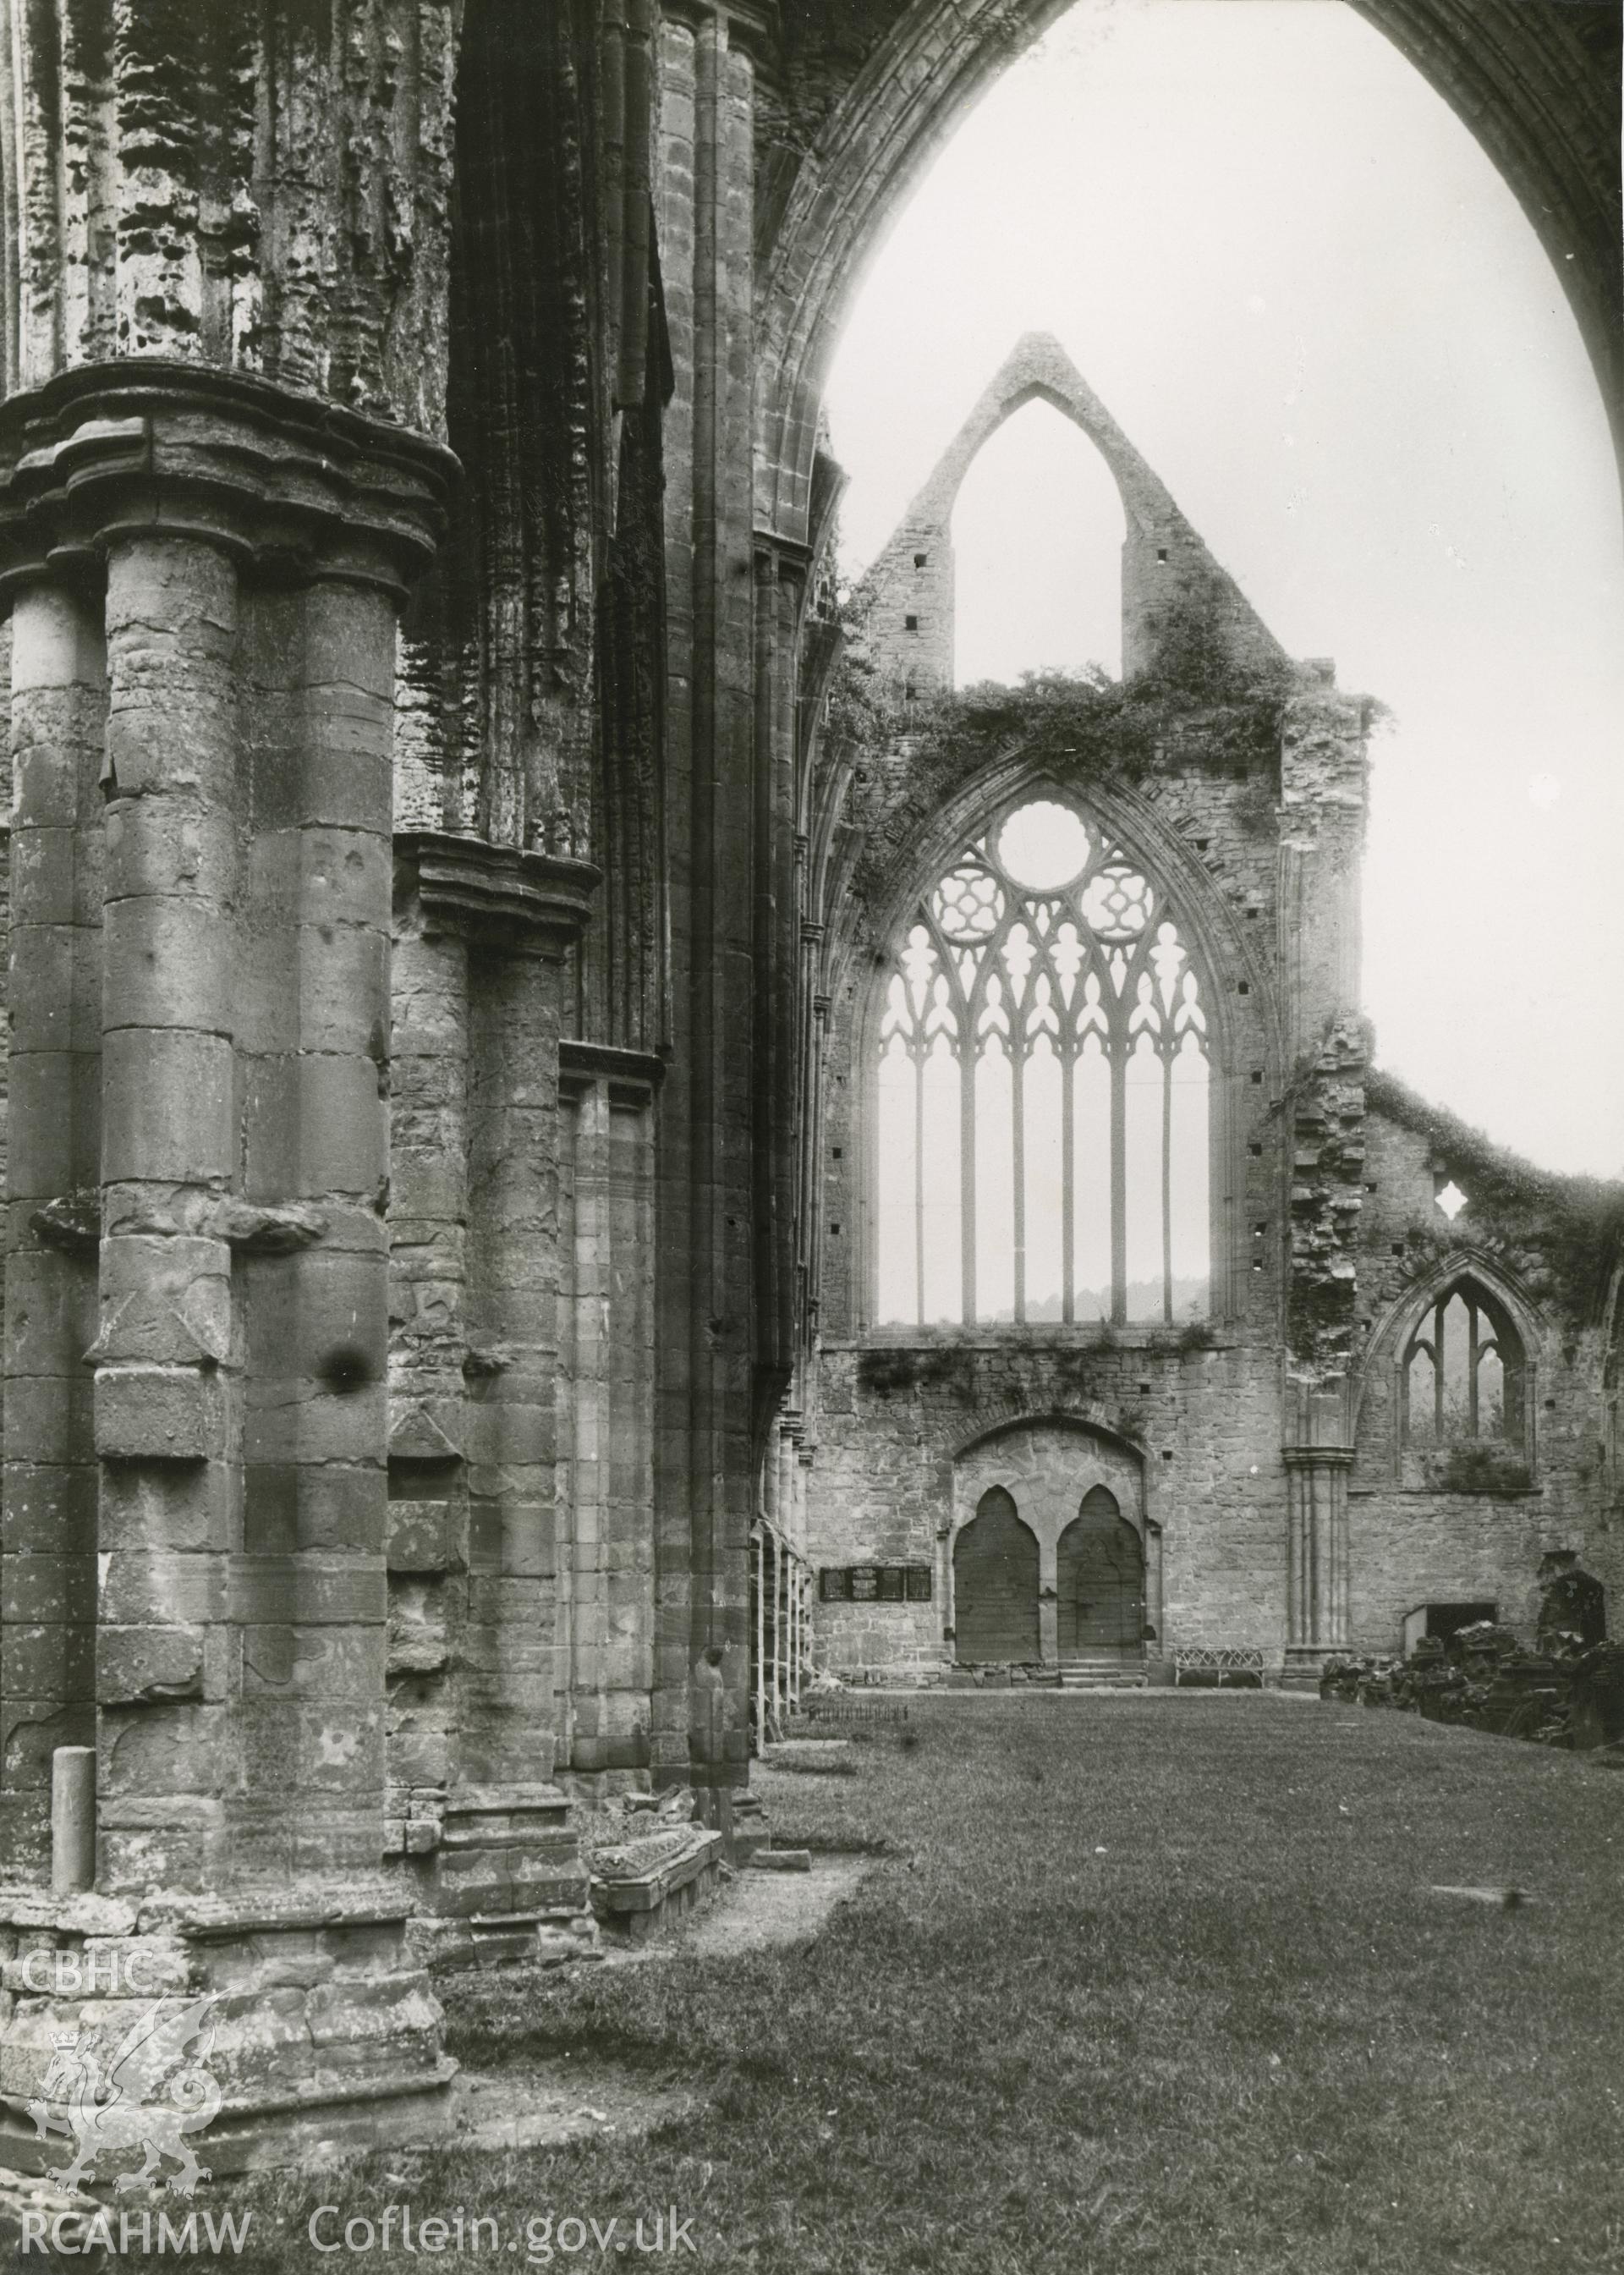 Digital copy of an image showing an interior view of Tintern Abbey.